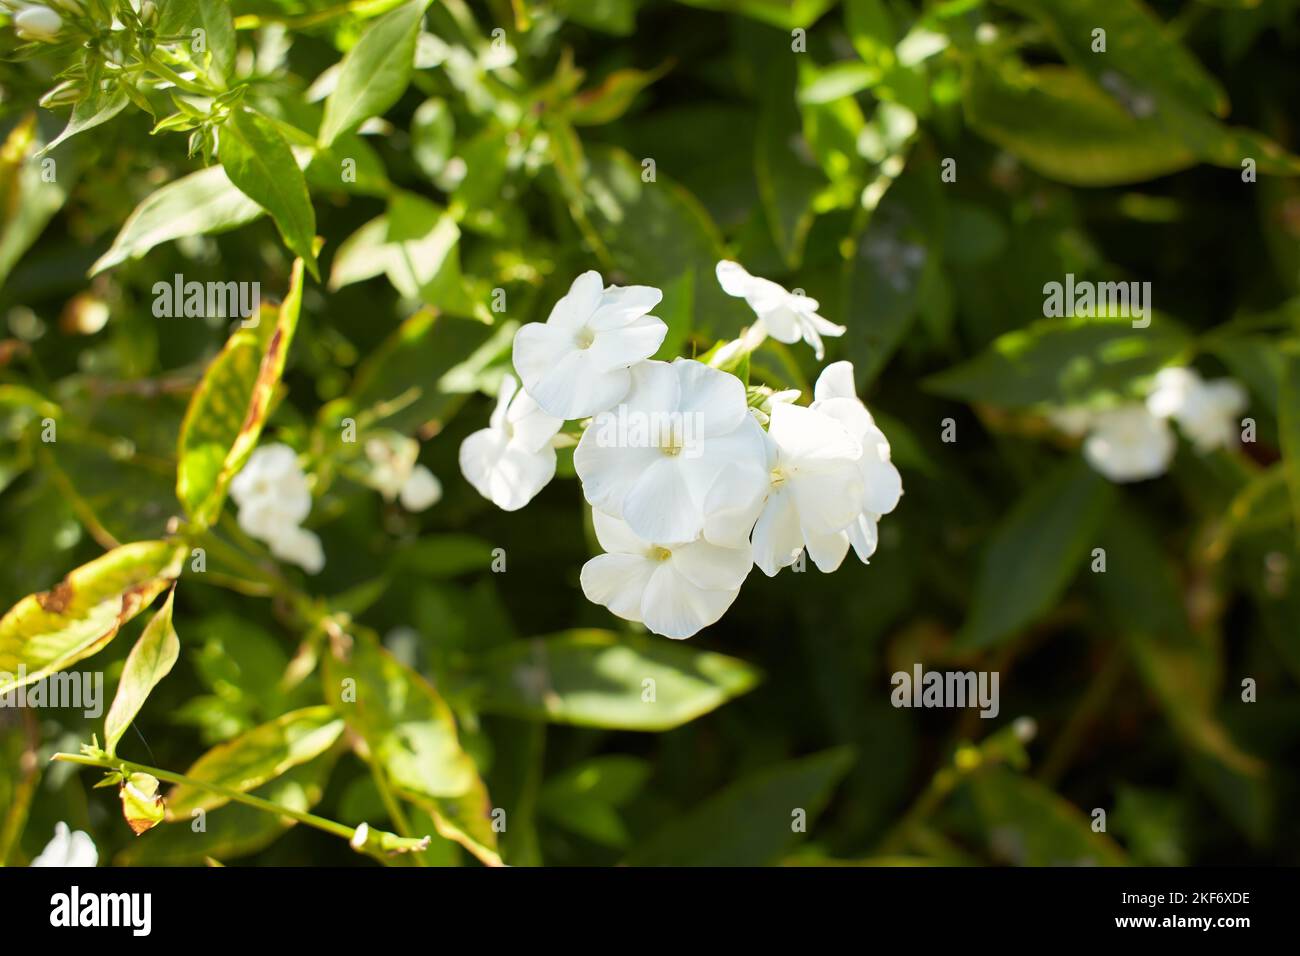 White and white flowers of polemoniaceae phlox paniculata white admiral in the garden. Summer and spring time Stock Photo